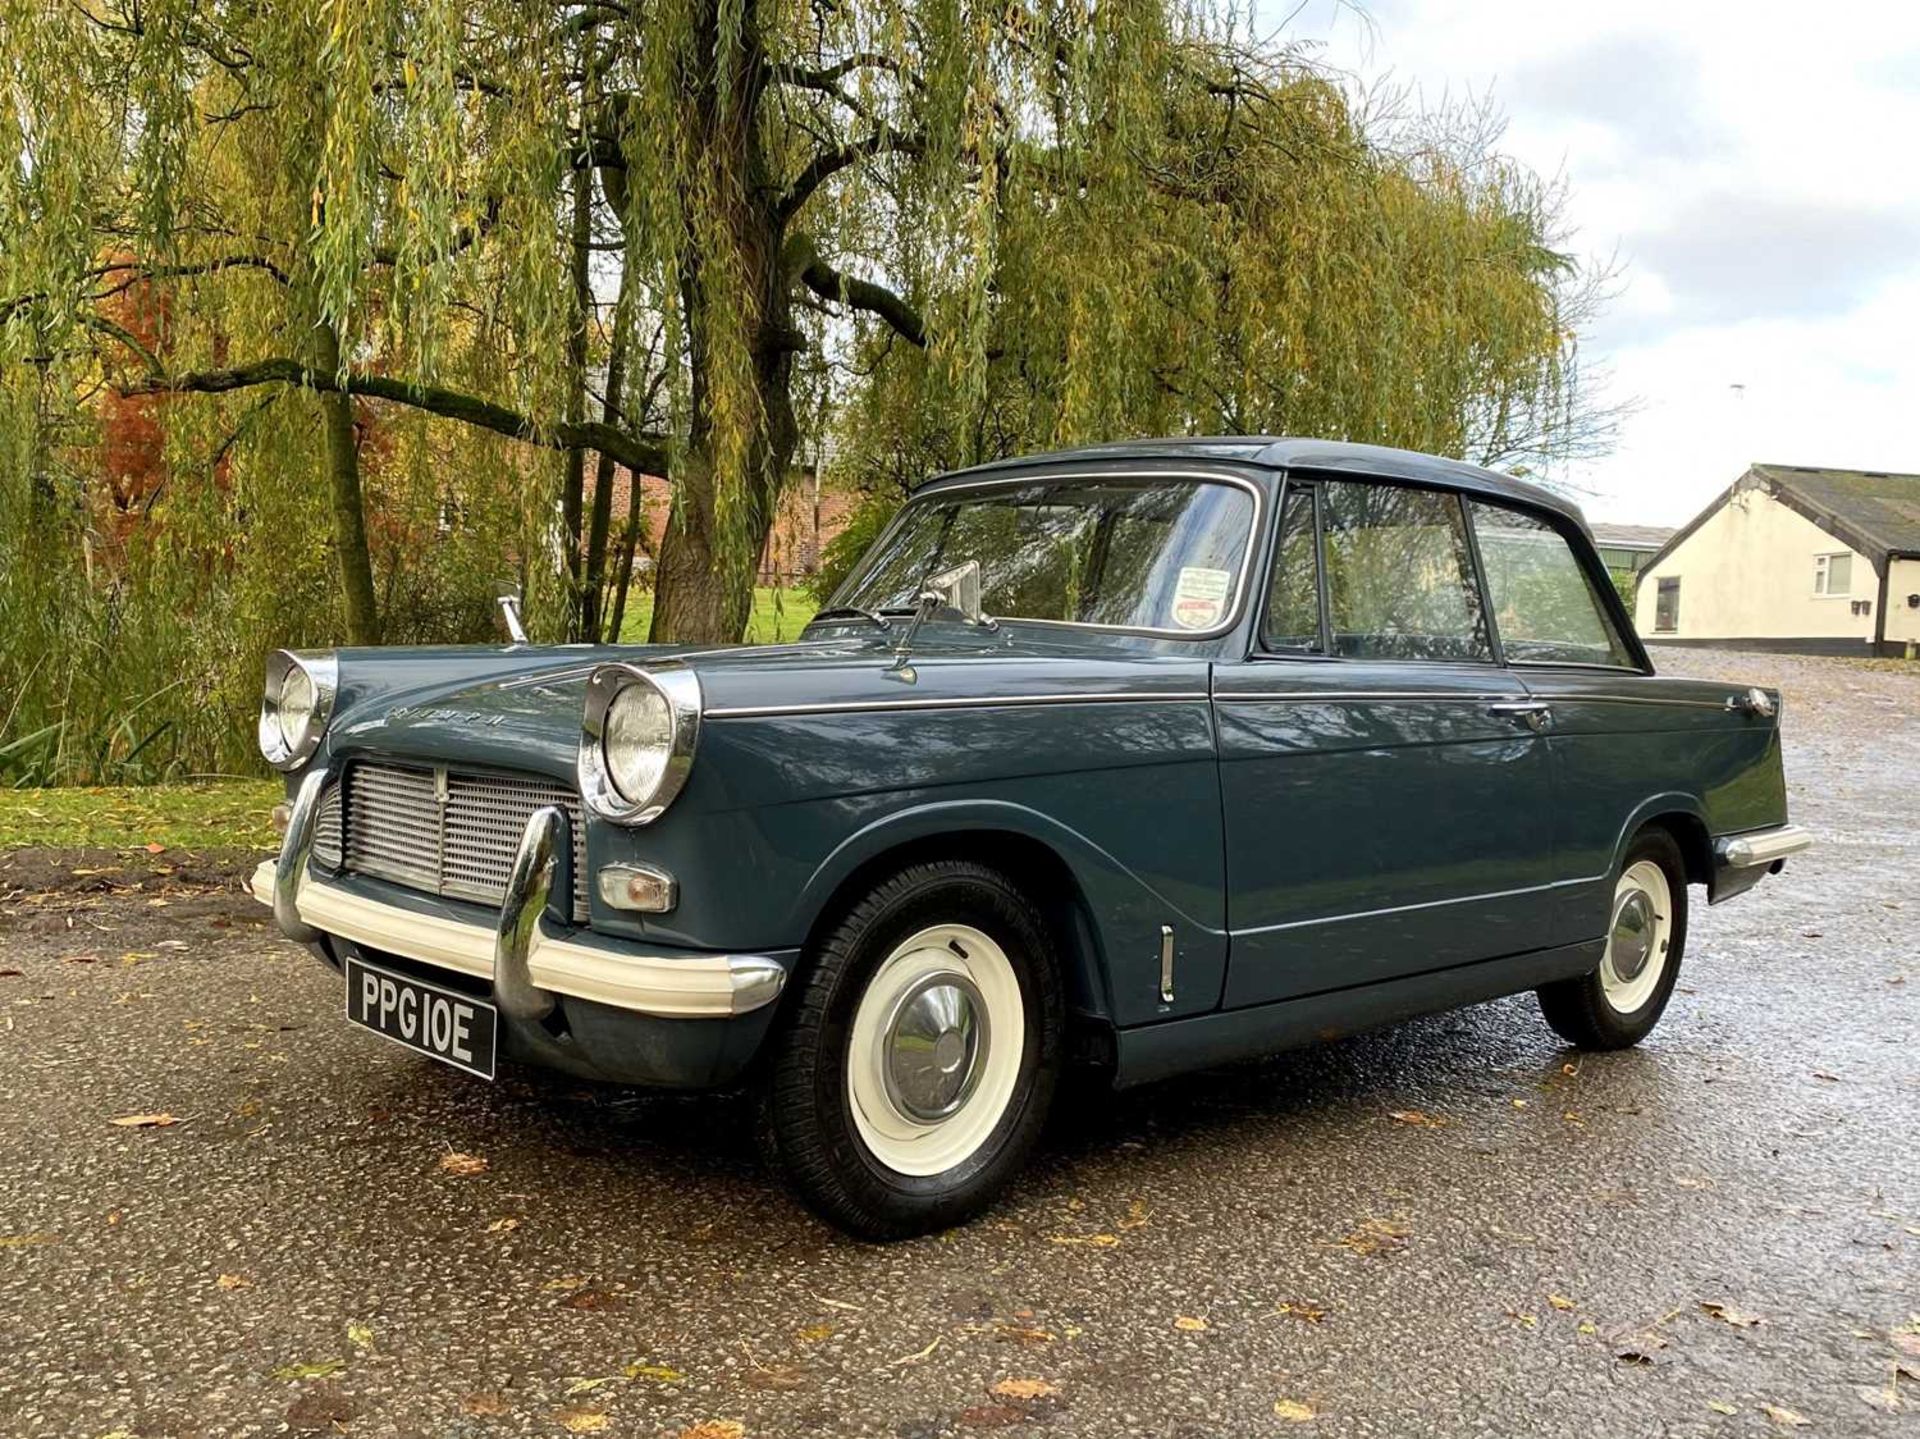 1967 Triumph Herald 12/50 *** NO RESERVE *** Subject to an extensive restoration - Image 6 of 97